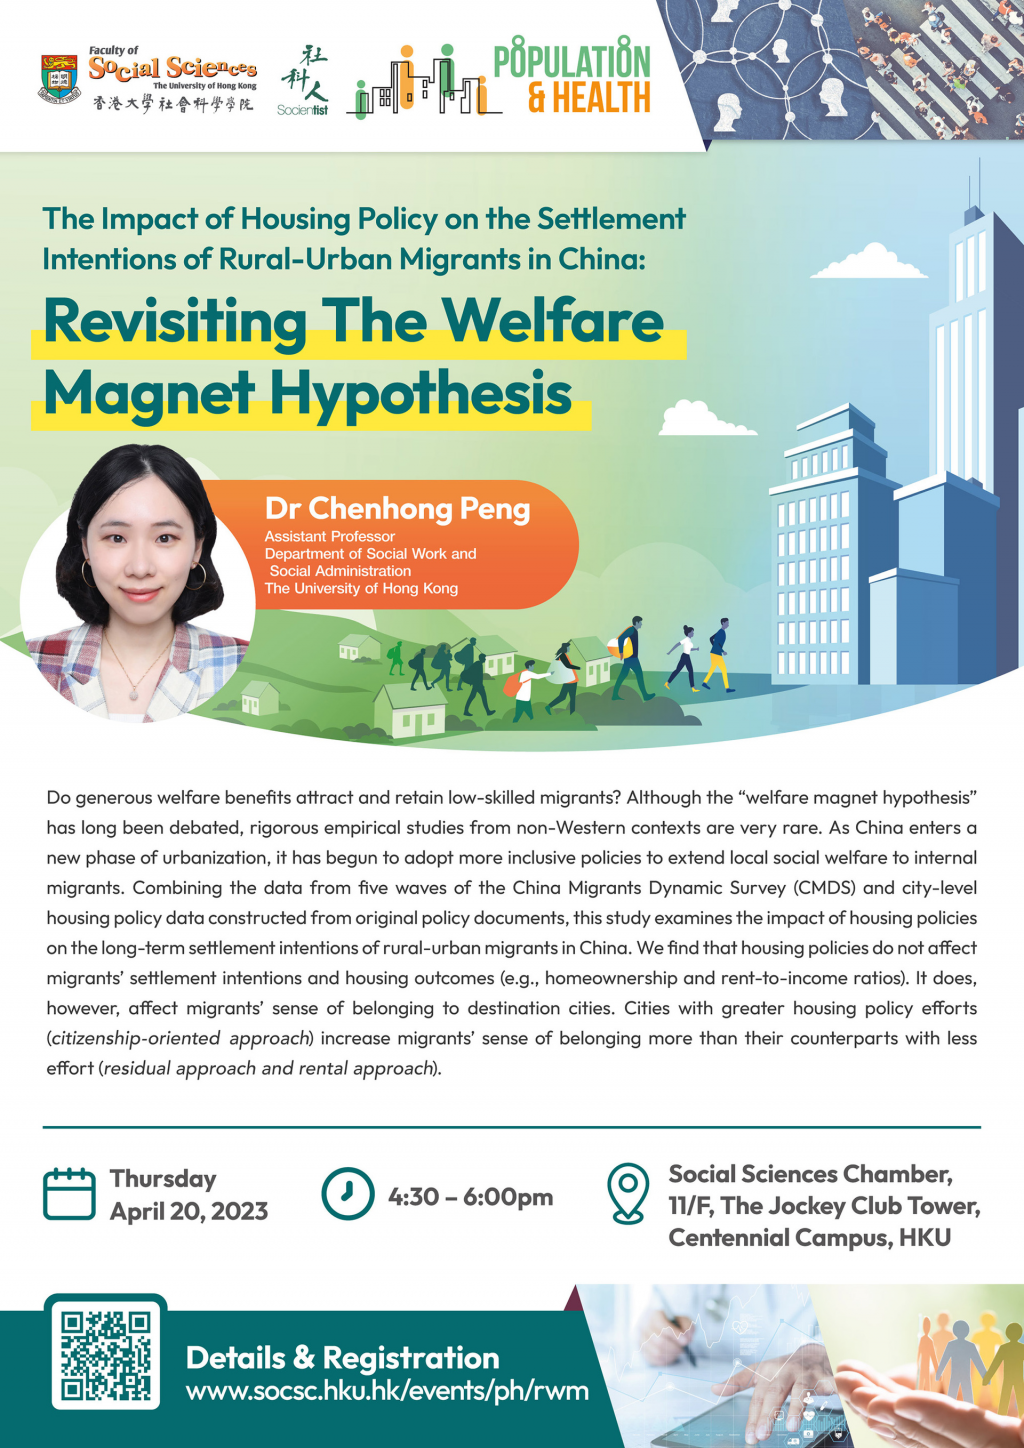 Impact of Housing Policy on the Settlement Intentions of Rural-Urban Migrants in China: Revisiting The Welfare Magnet Hypothesis